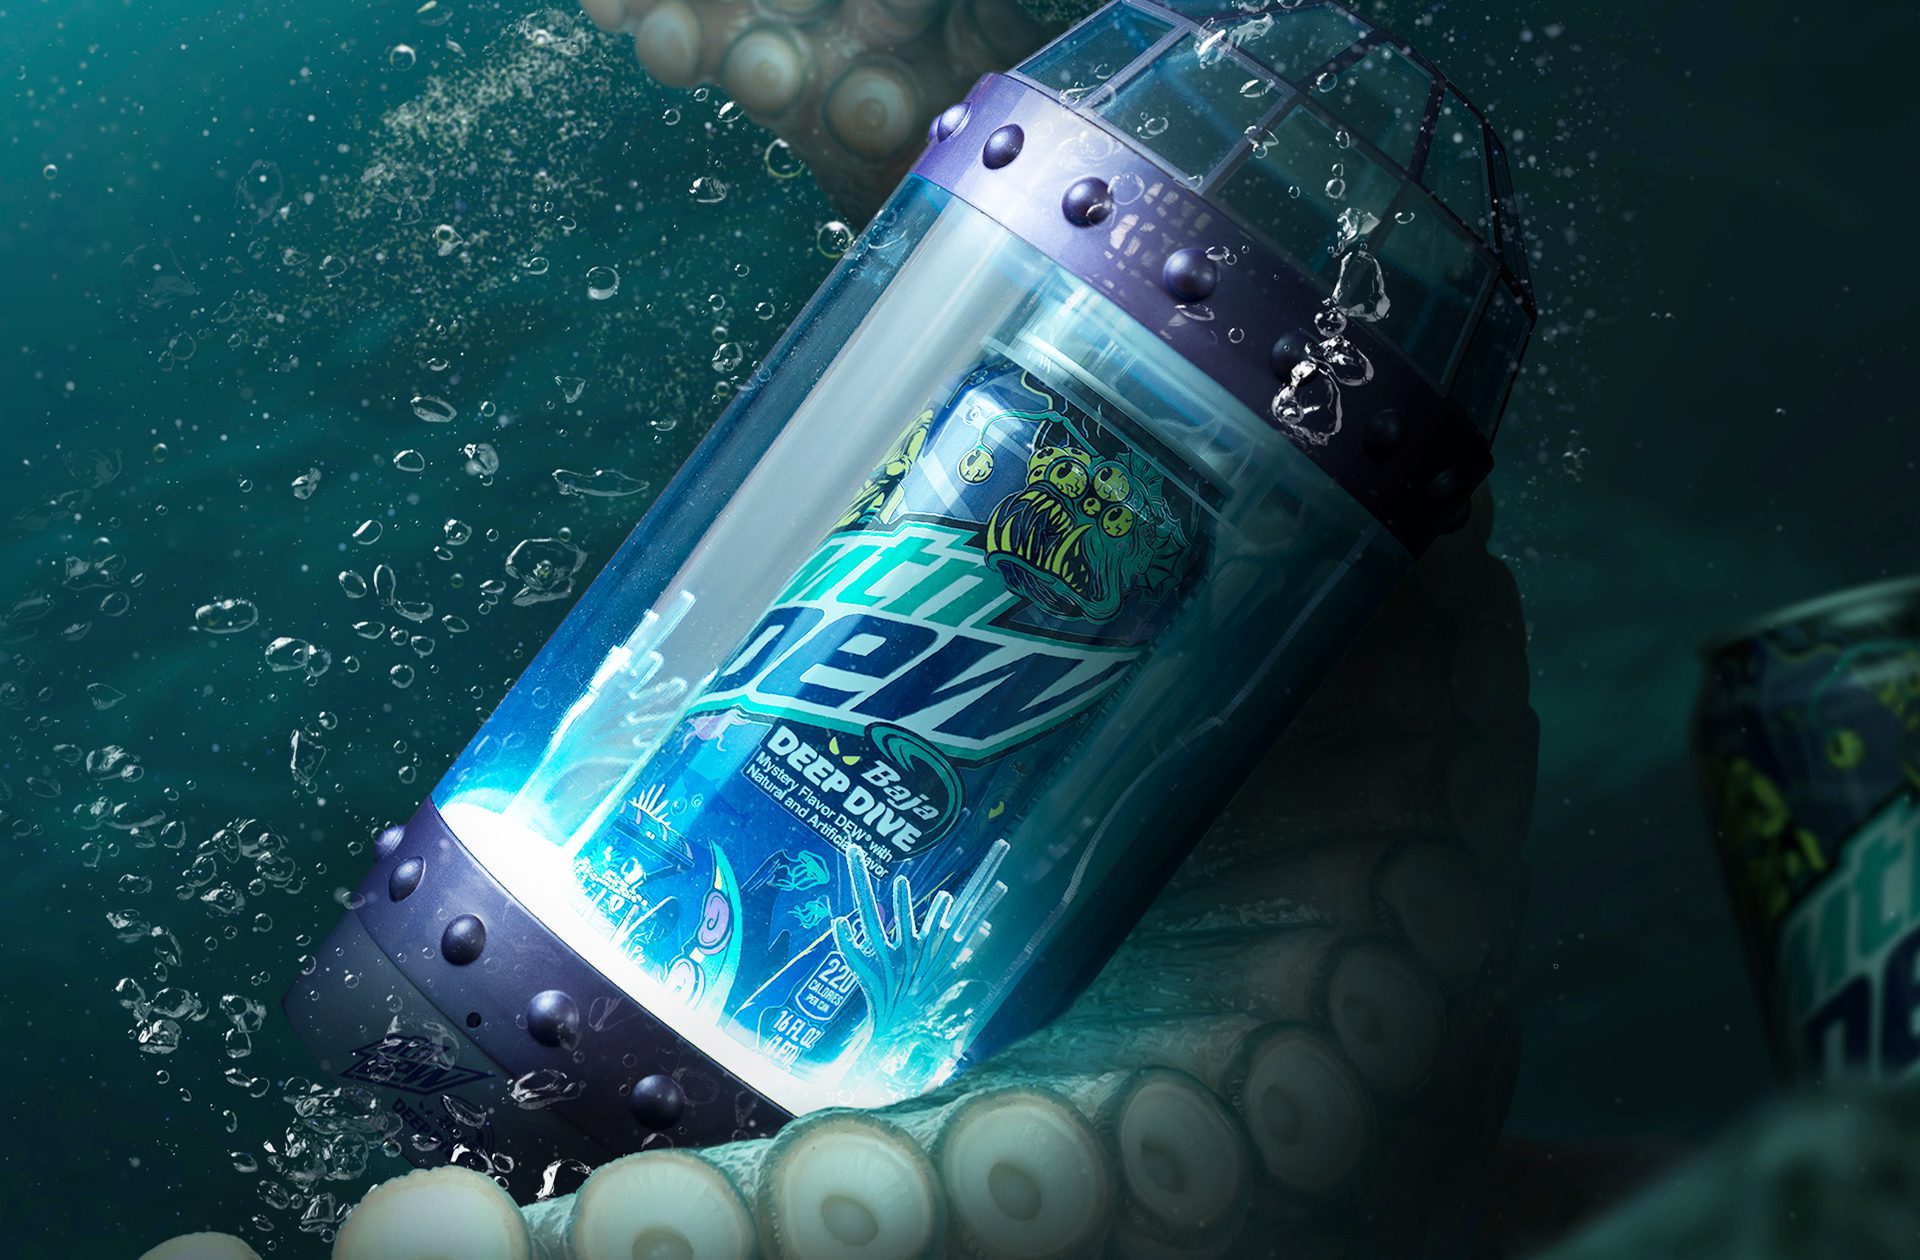 Render of a tentacle grabbing an influencer unboxing experience for Mountain Dew's summer of baja, promoting Baja Deep Dive.